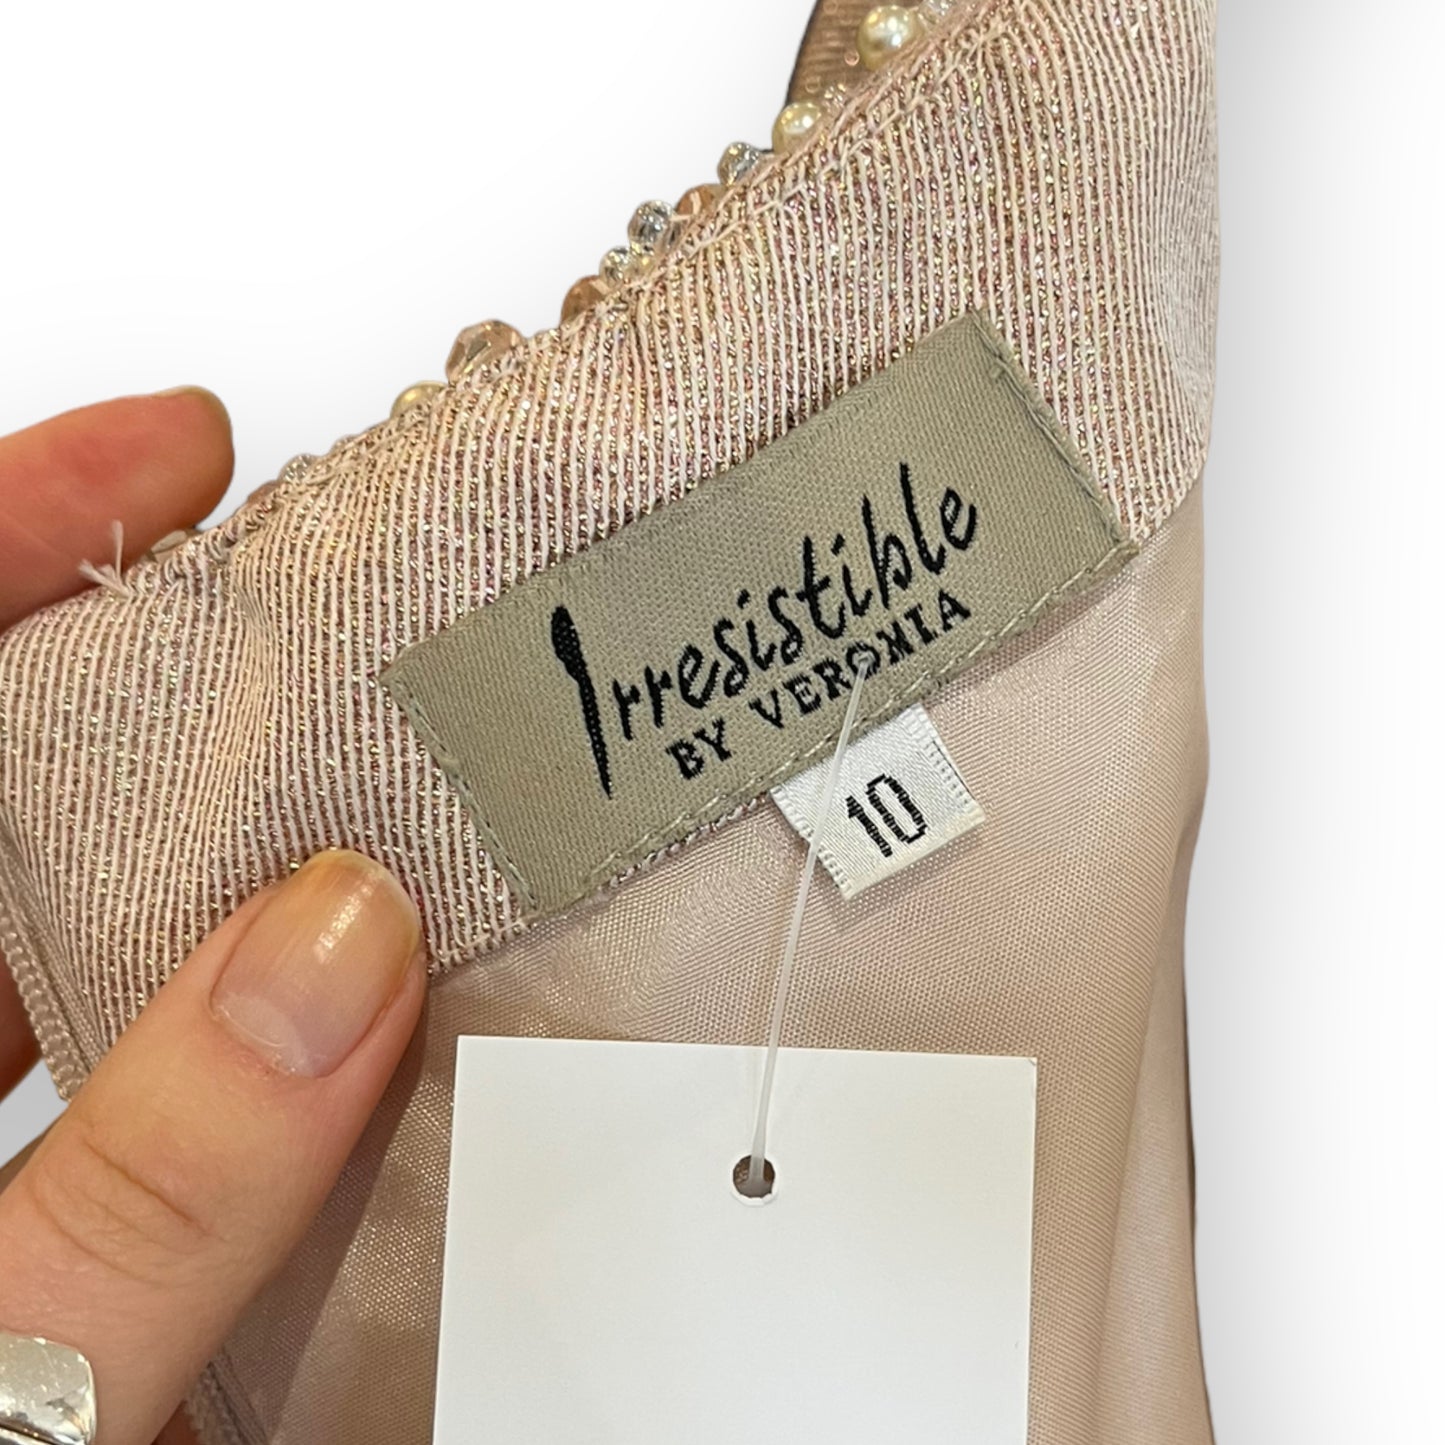 Irresistible by Veromia Pink Sparkly Dress